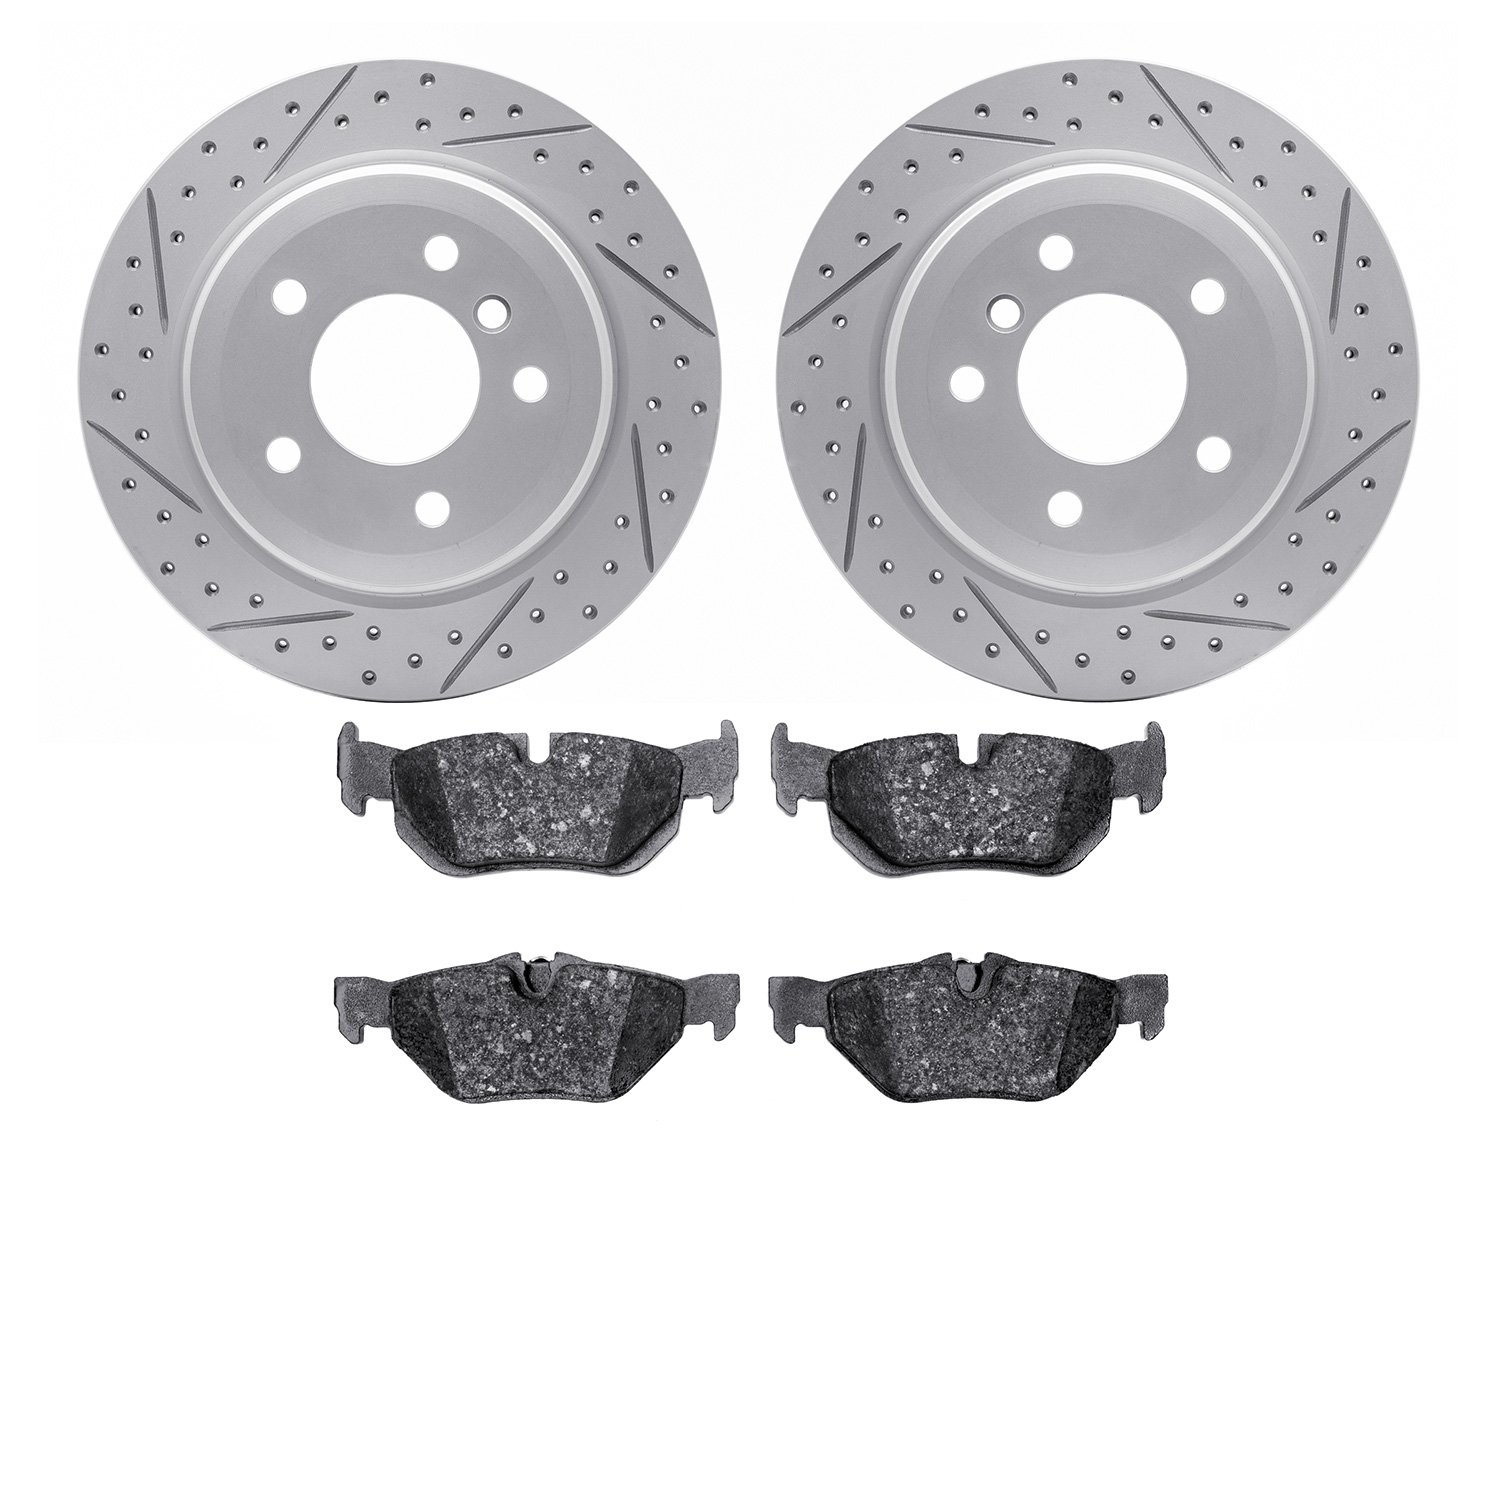 2502-31090 Geoperformance Drilled/Slotted Rotors w/5000 Advanced Brake Pads Kit, 2006-2015 BMW, Position: Rear